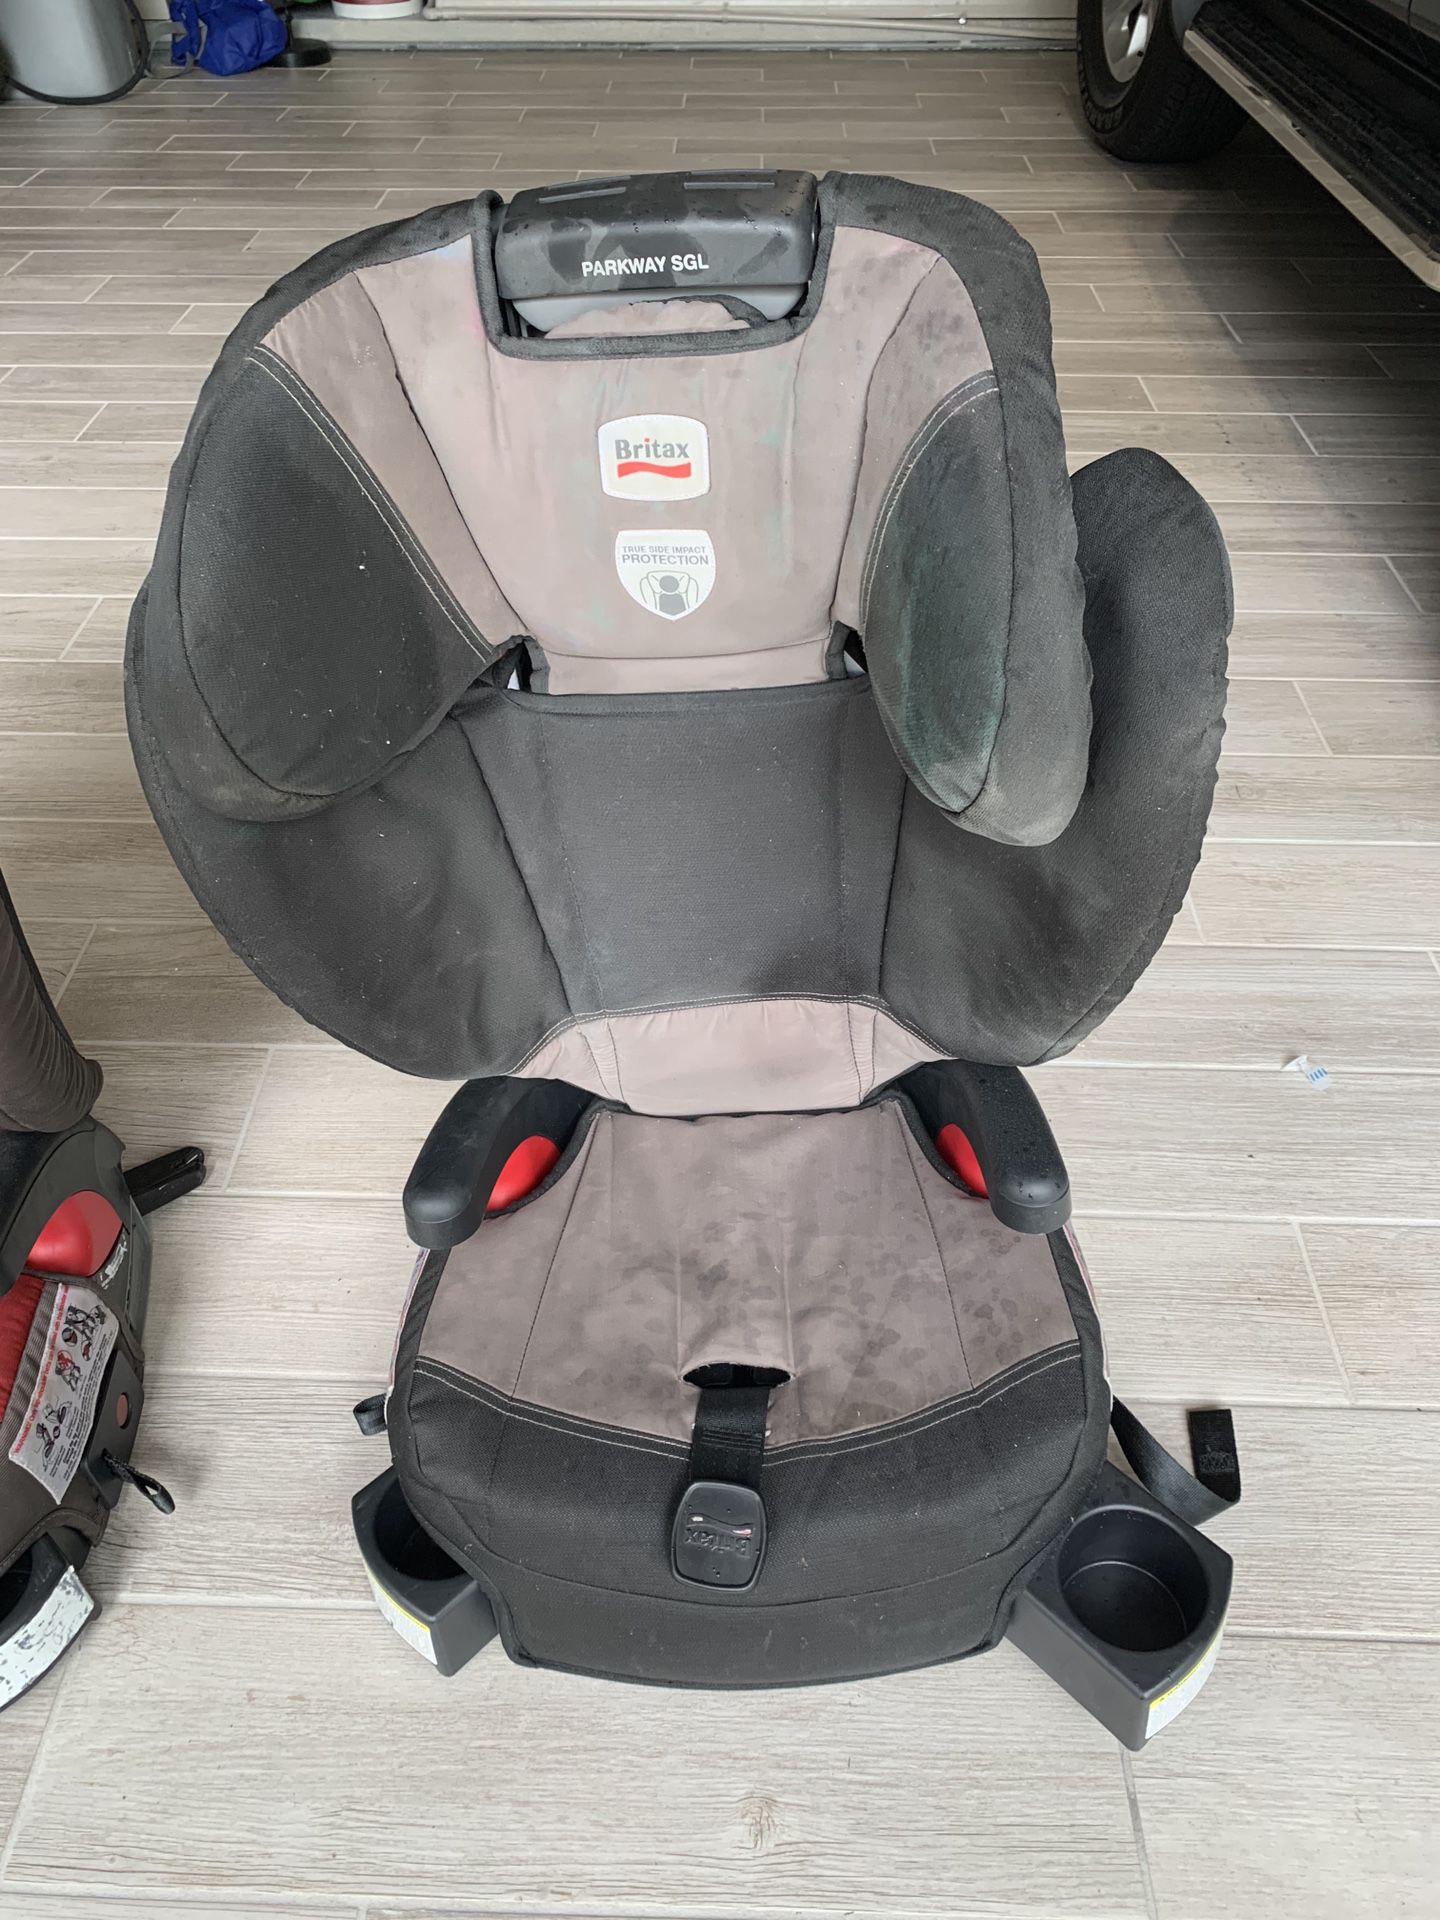 Britax booster seat in great condition. Free